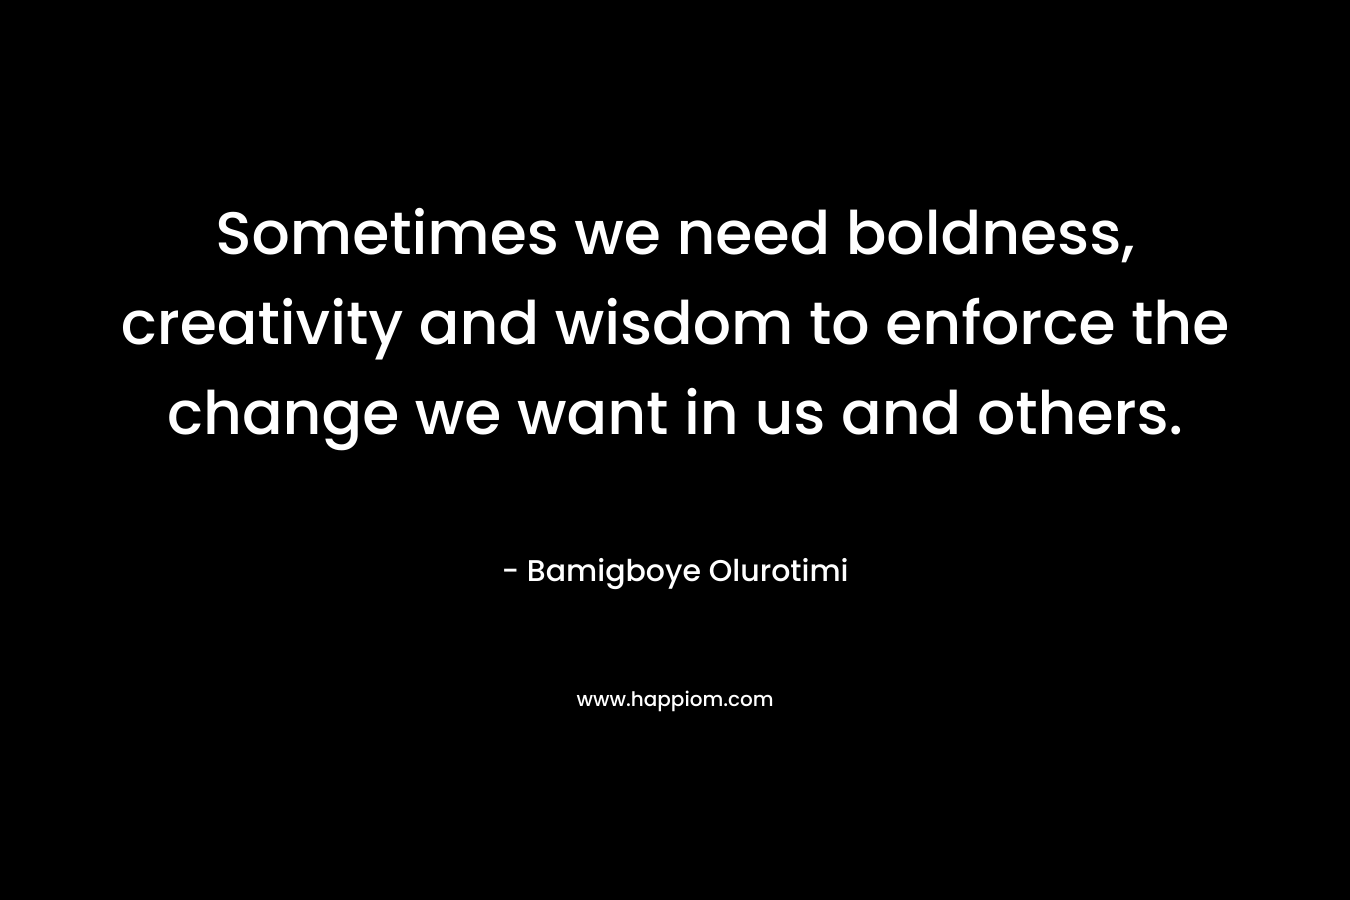 Sometimes we need boldness, creativity and wisdom to enforce the change we want in us and others.